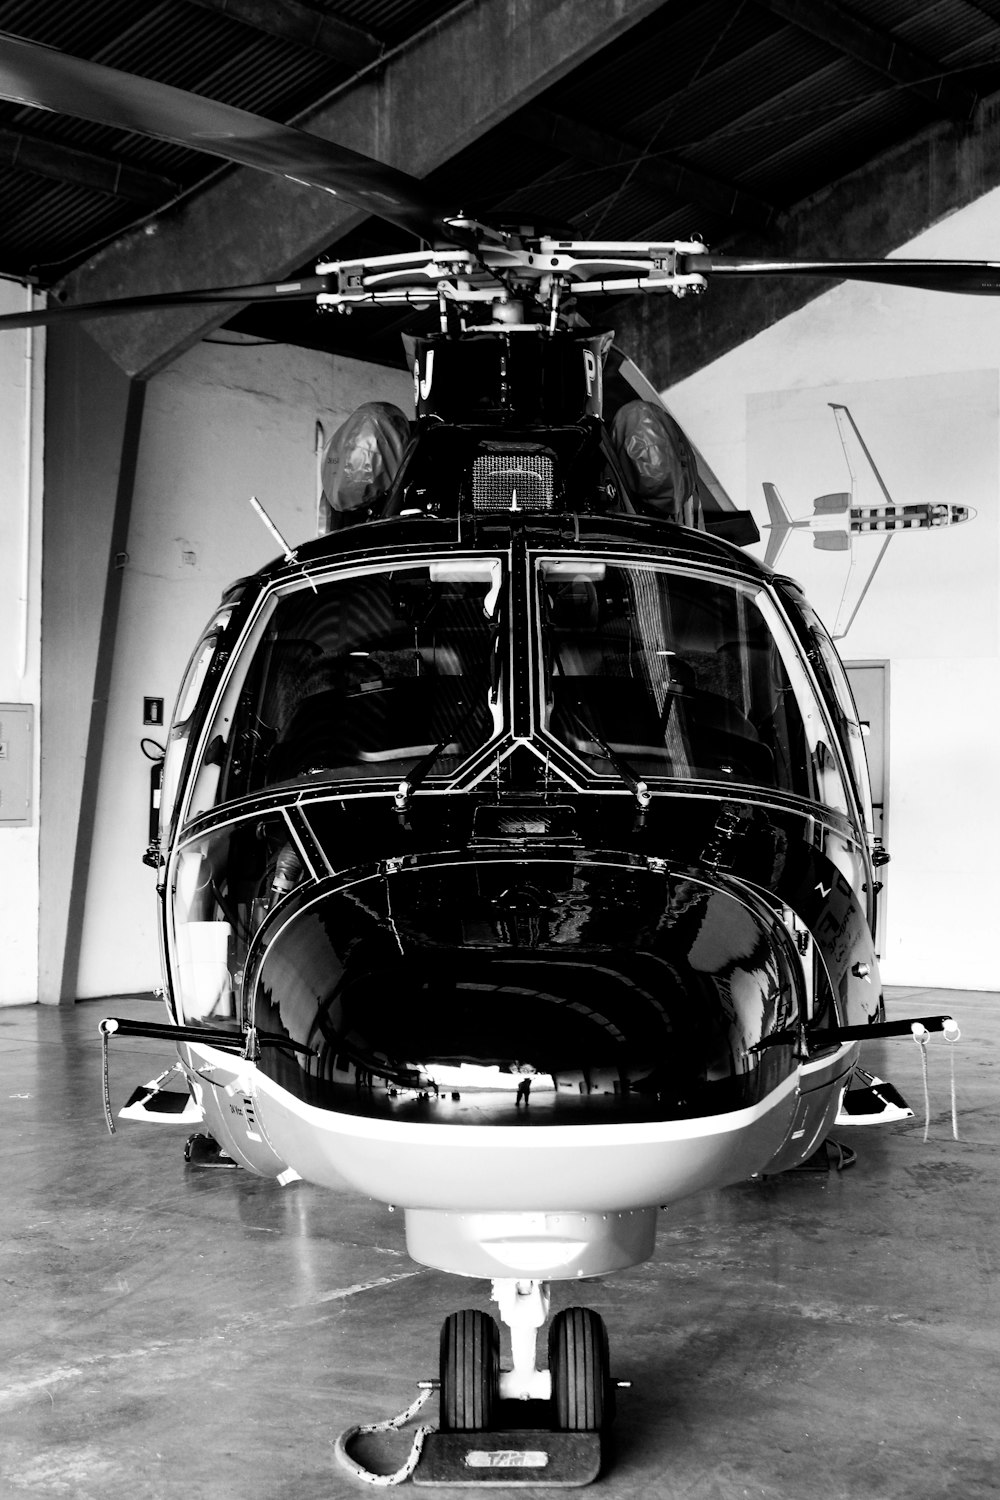 a black and white photo of a helicopter in a hangar